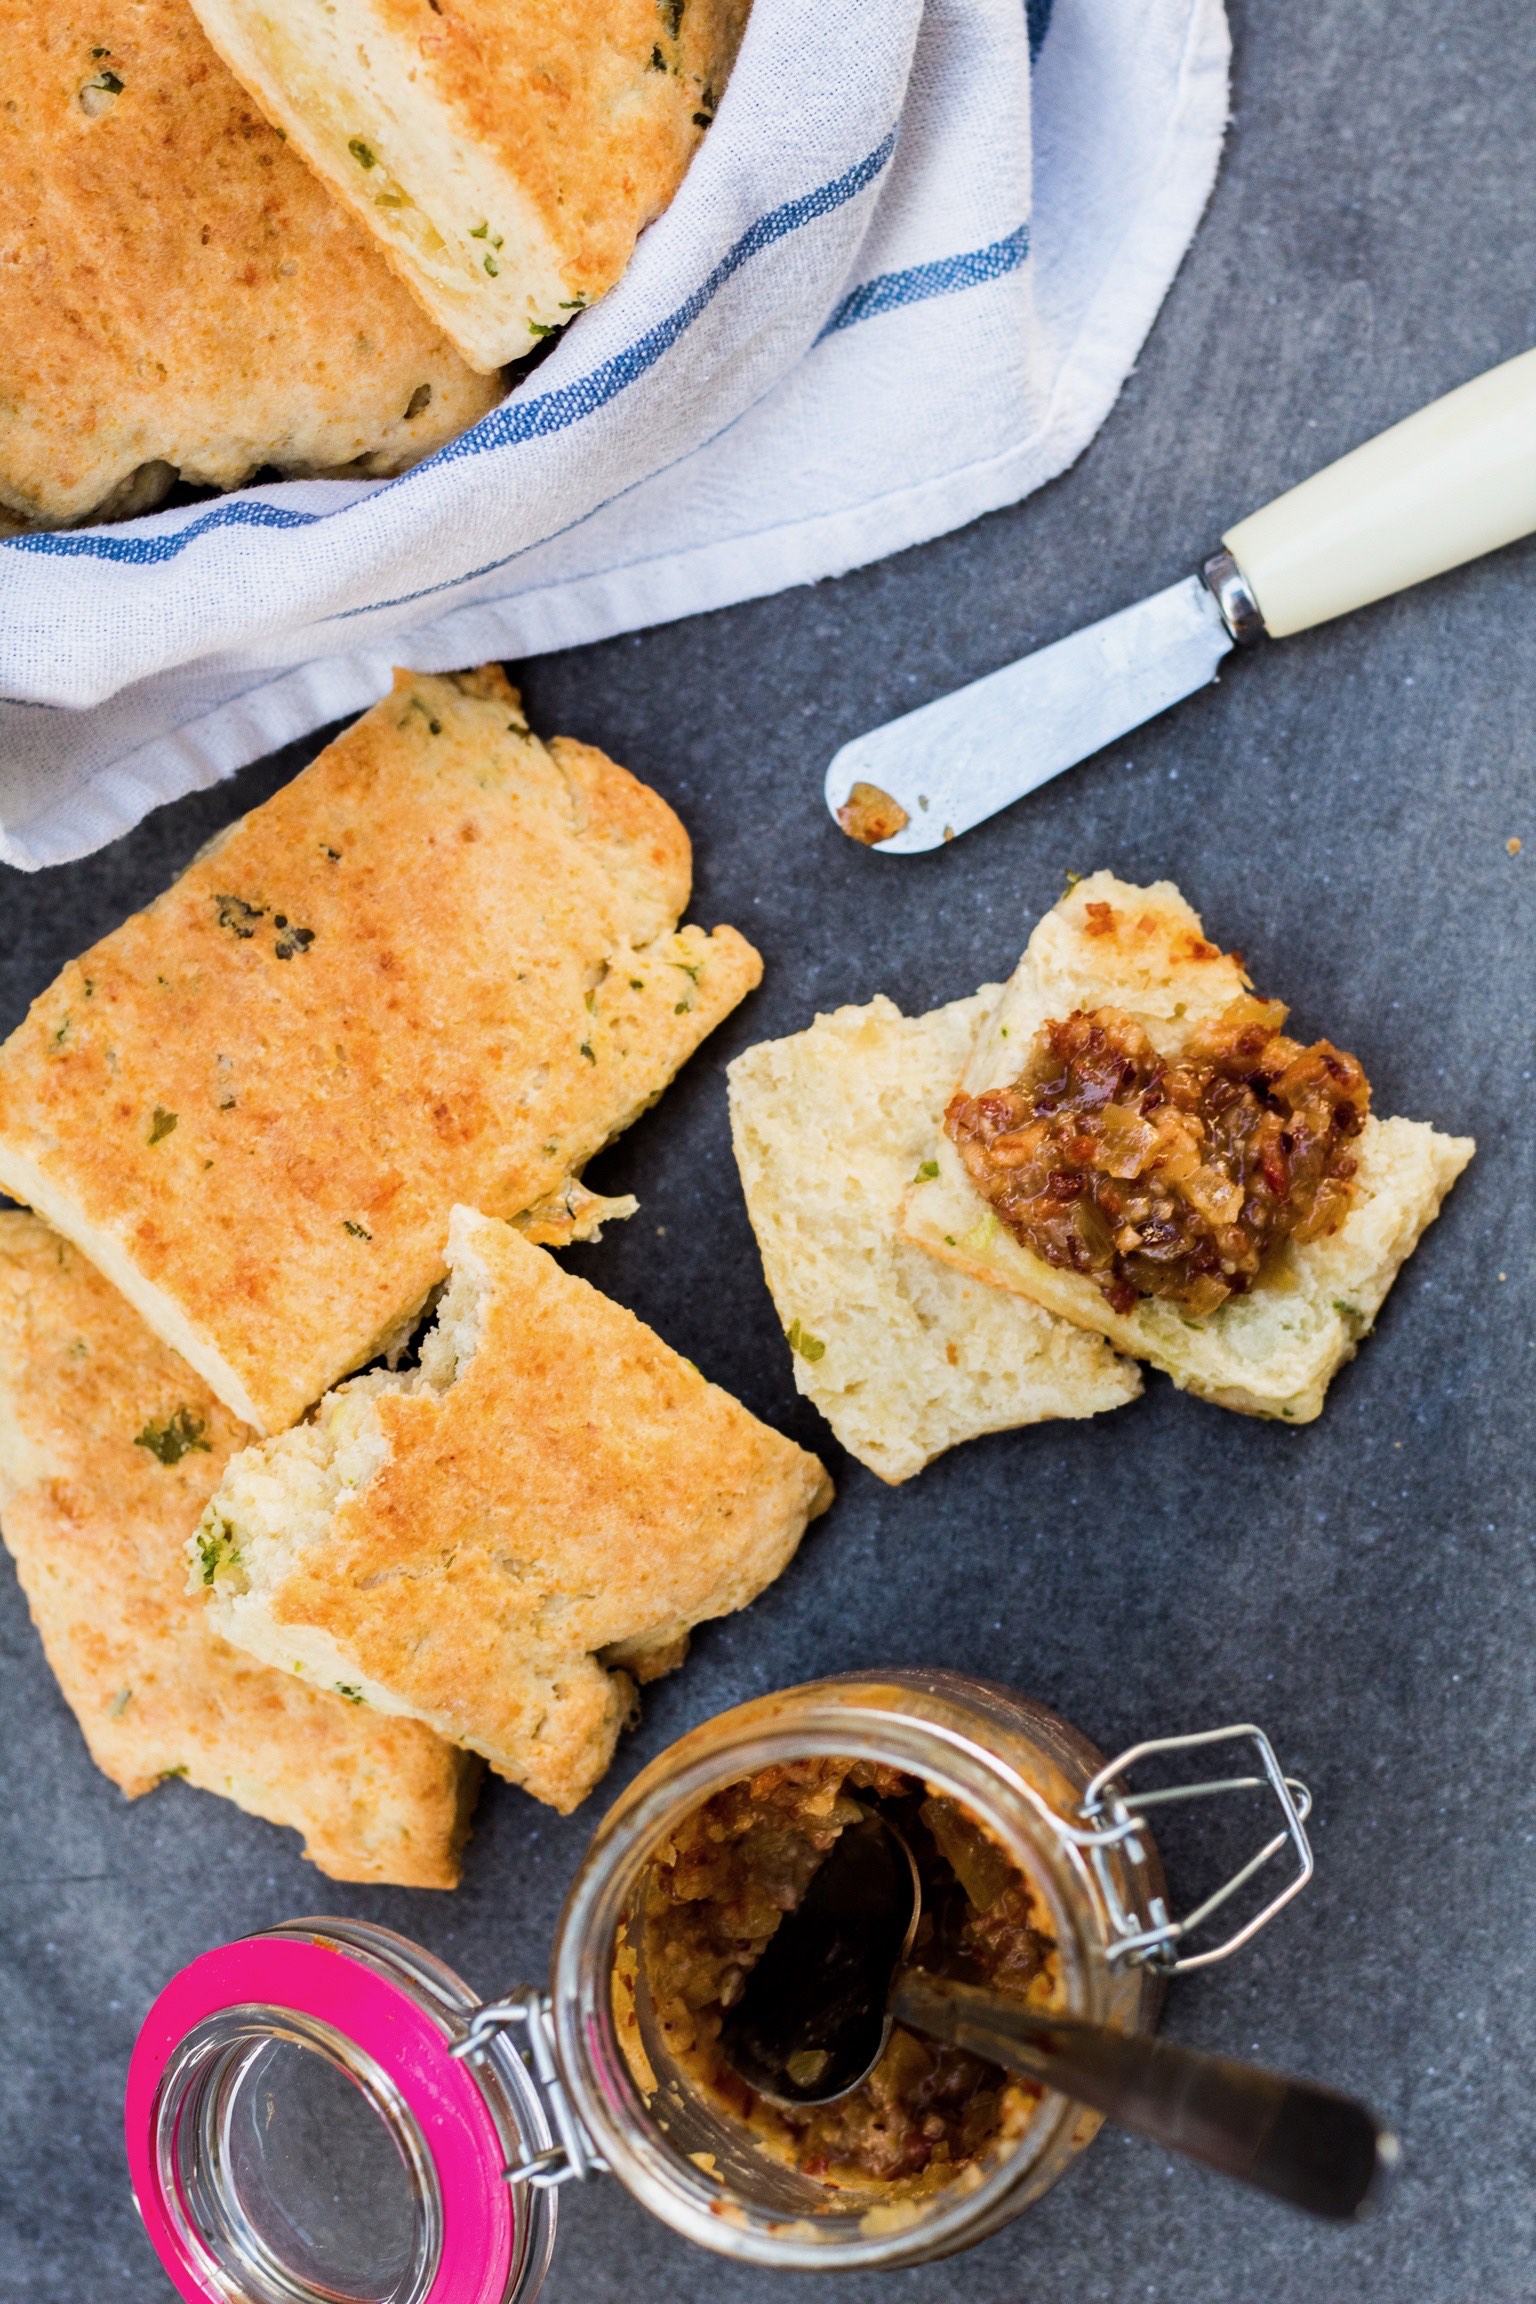 Chive biscuits and bacon butter